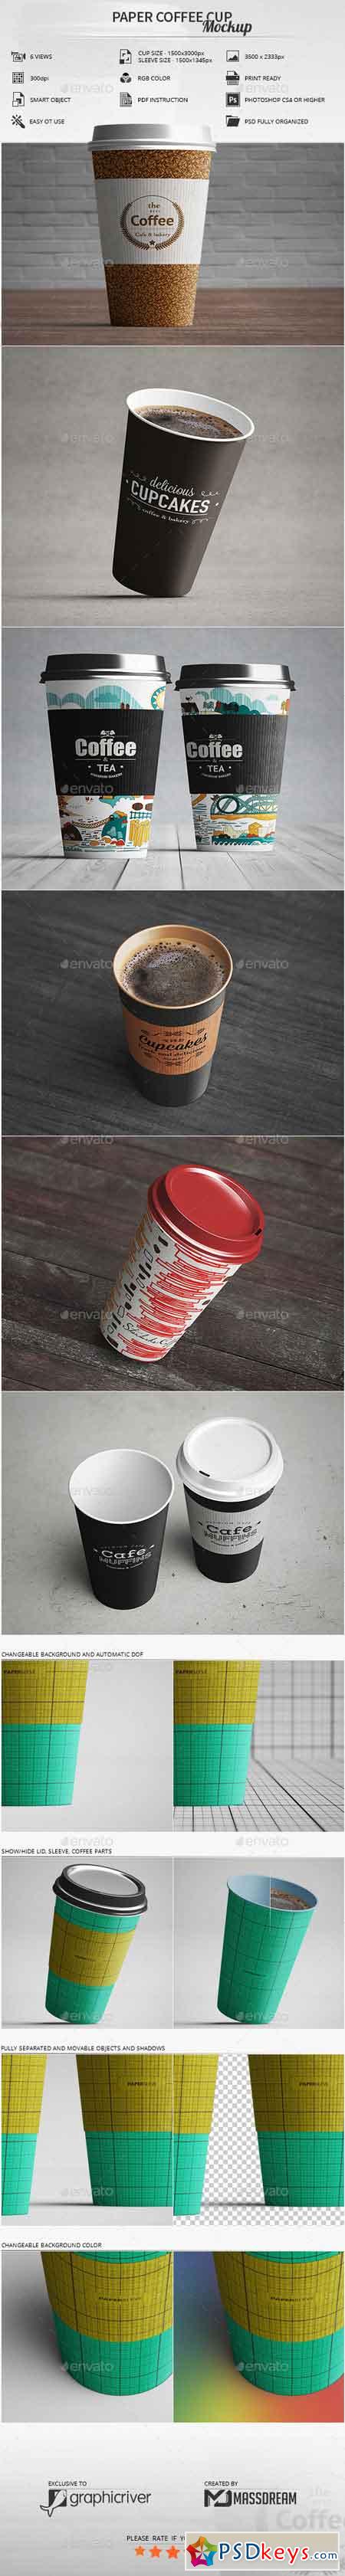 Download Paper Coffee Cup Mockup 16532404 » Free Download Photoshop Vector Stock image Via Torrent ...